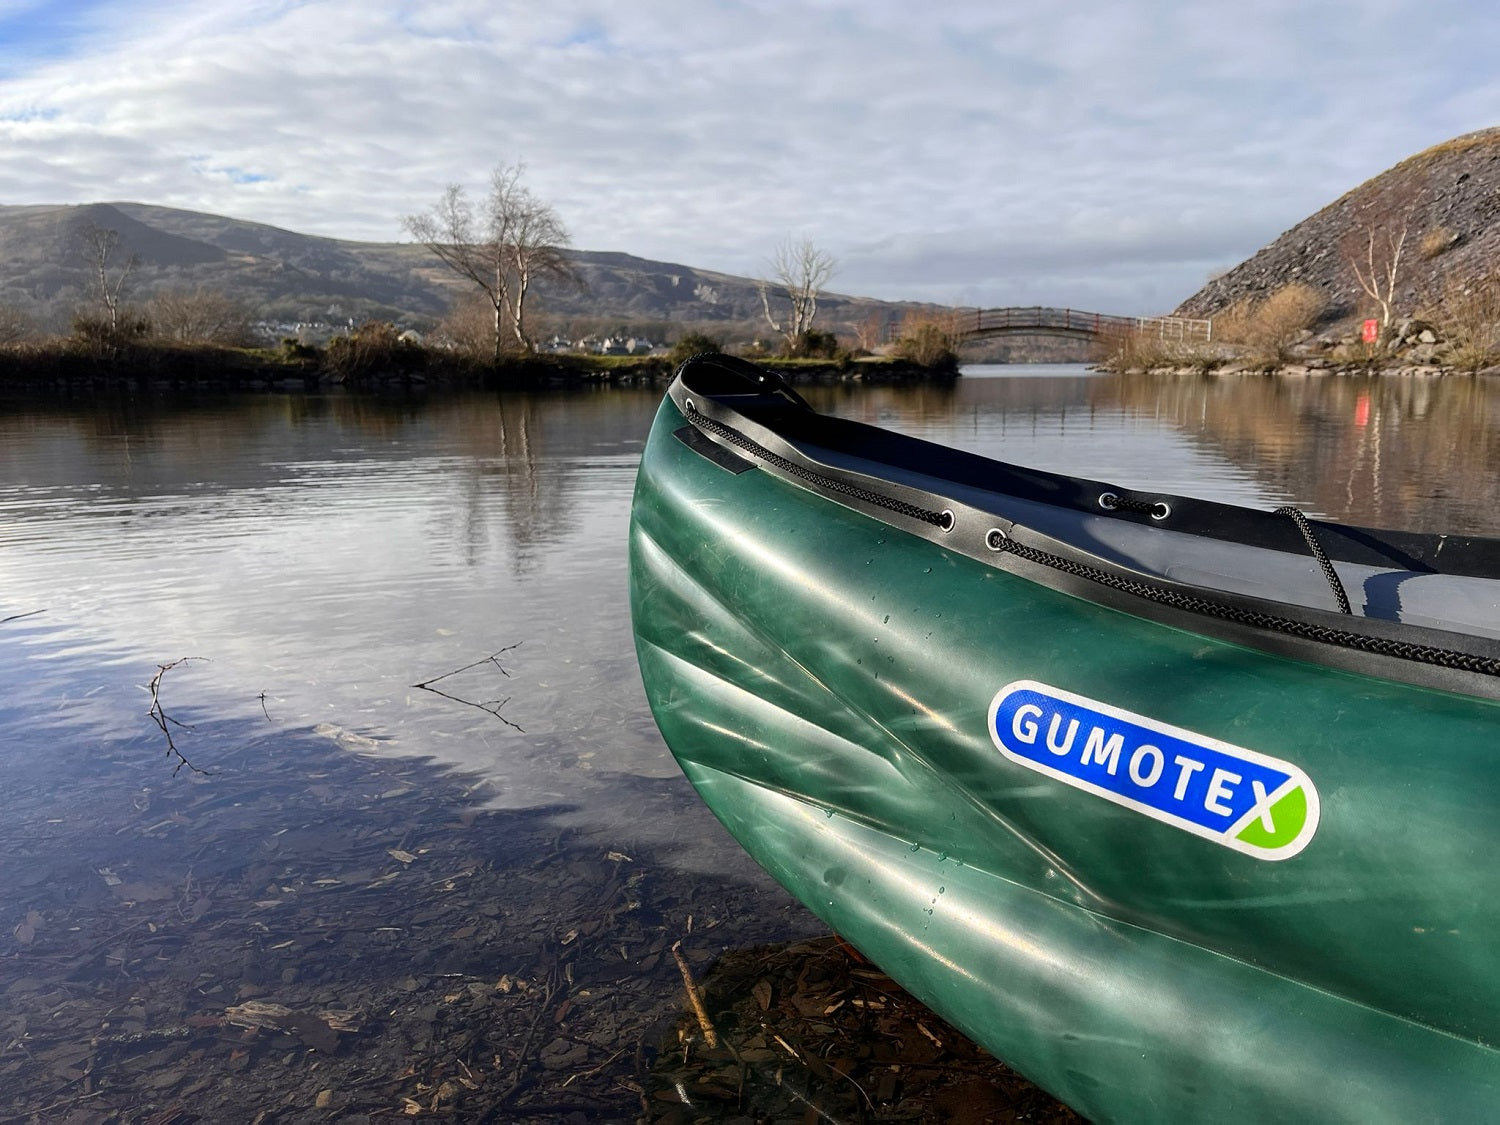 Gumotex Scout in Wales - paddling an inflatable canoe